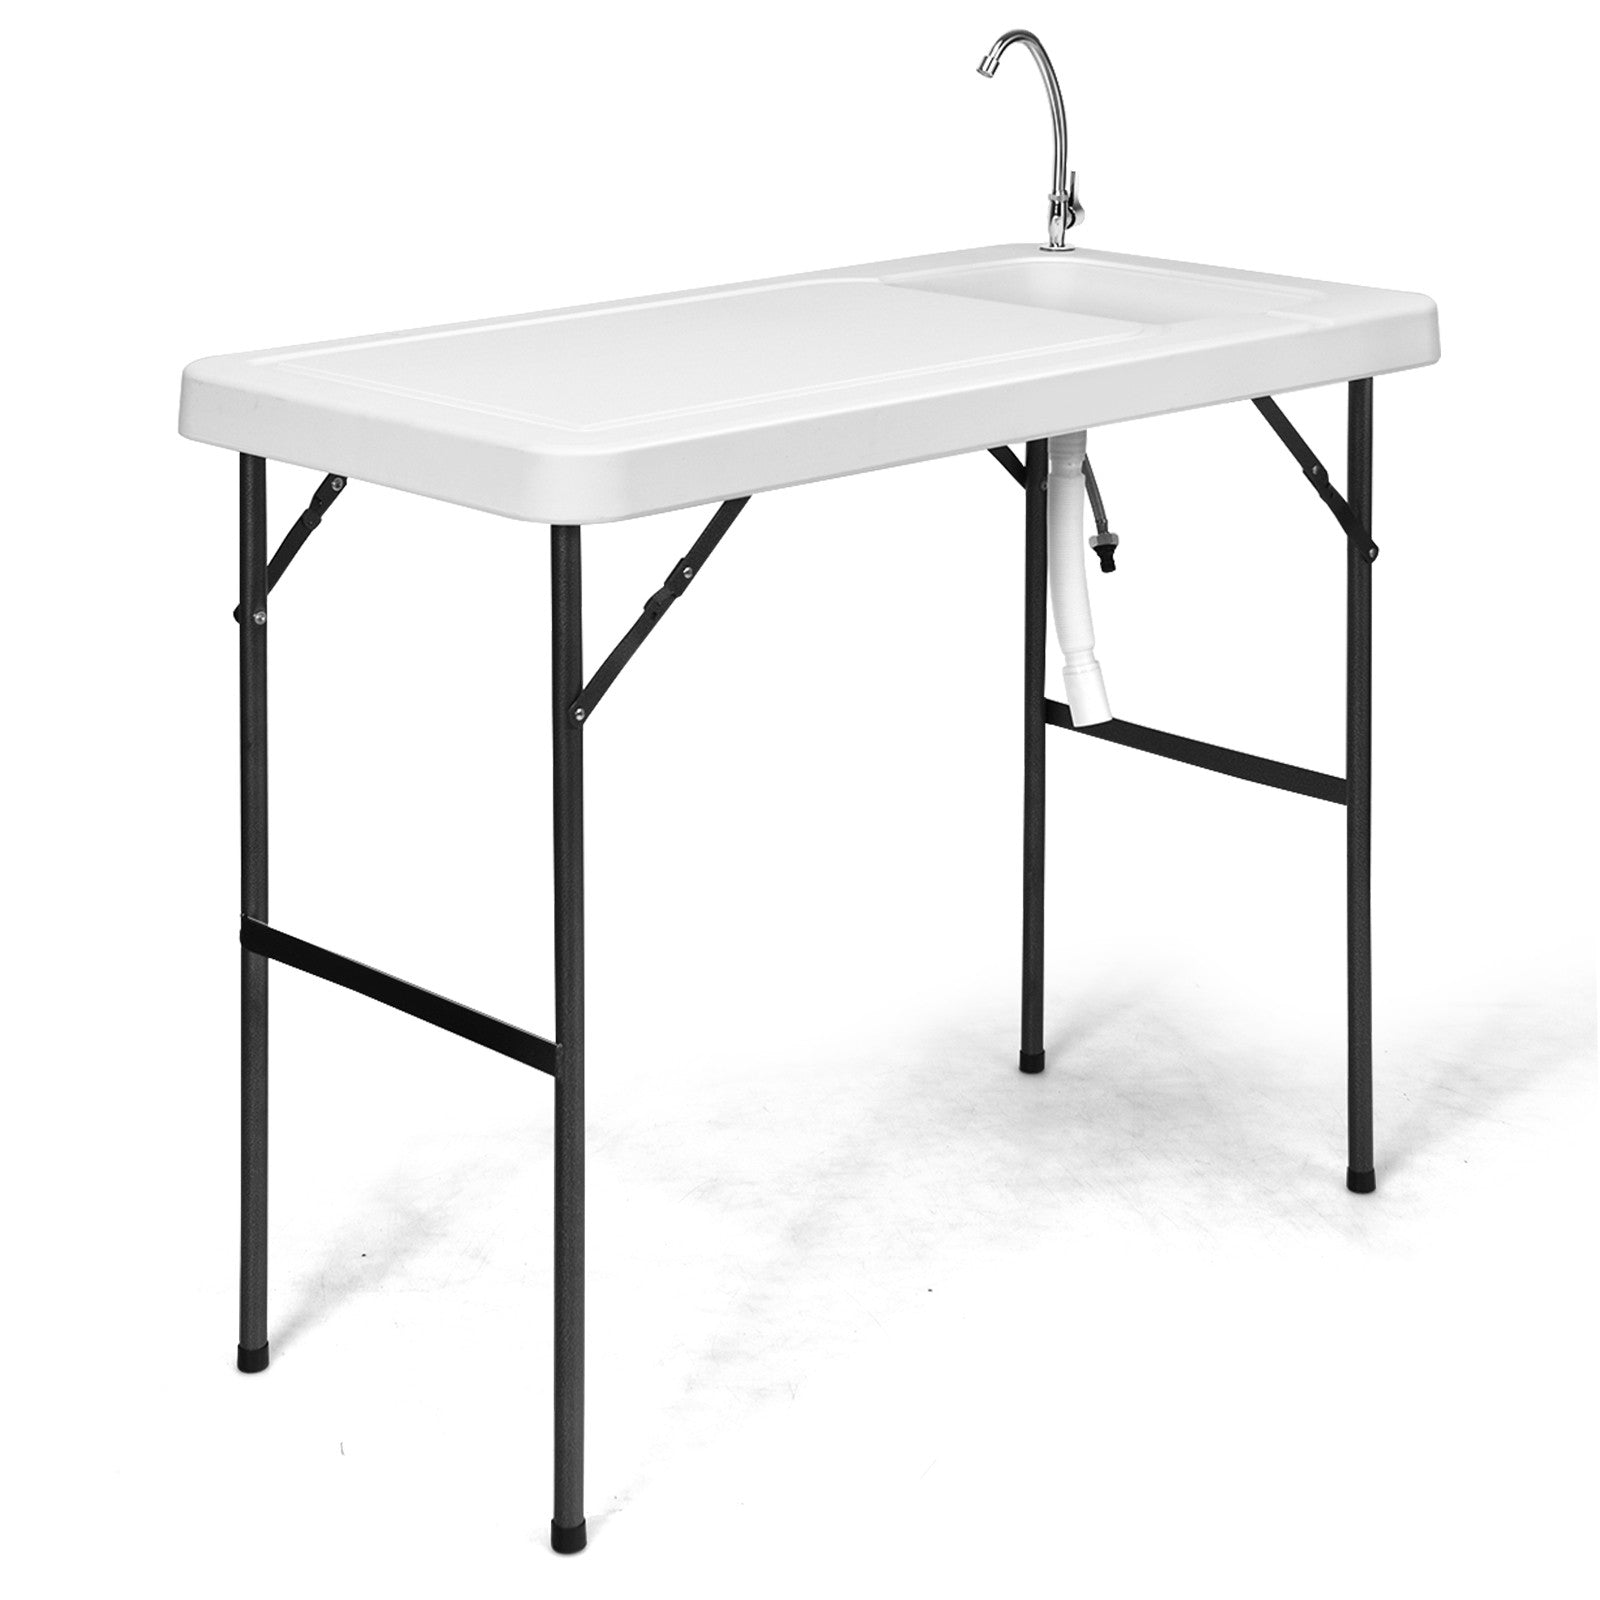 Folding Fish Cleaning Table, Camping Table with Sink and Faucet